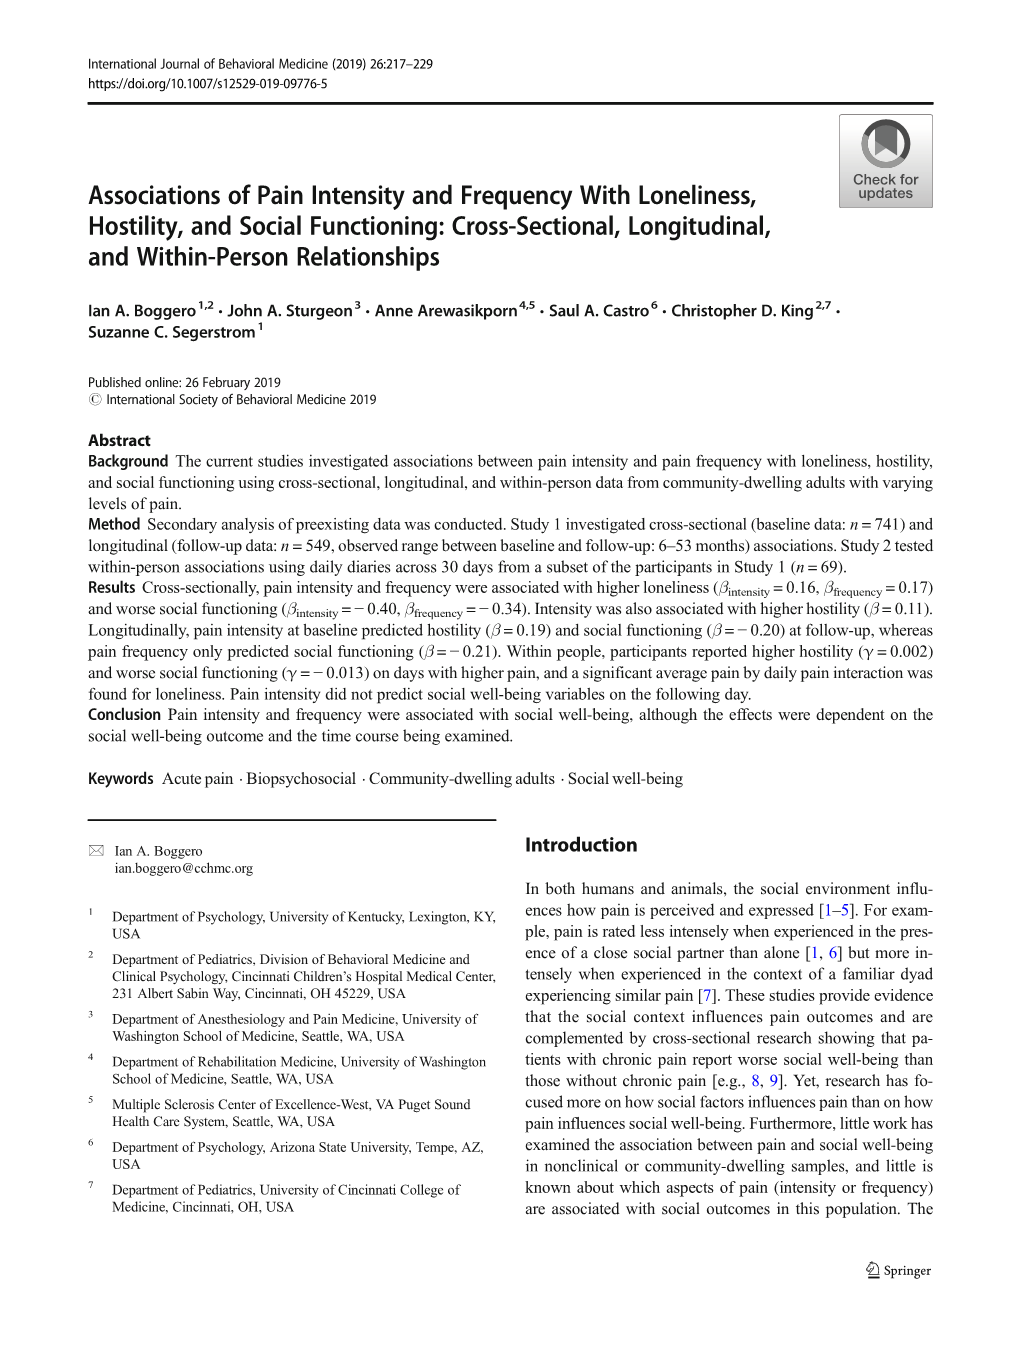 Associations of Pain Intensity and Frequency with Loneliness, Hostility, and Social Functioning: Cross-Sectional, Longitudinal, and Within-Person Relationships